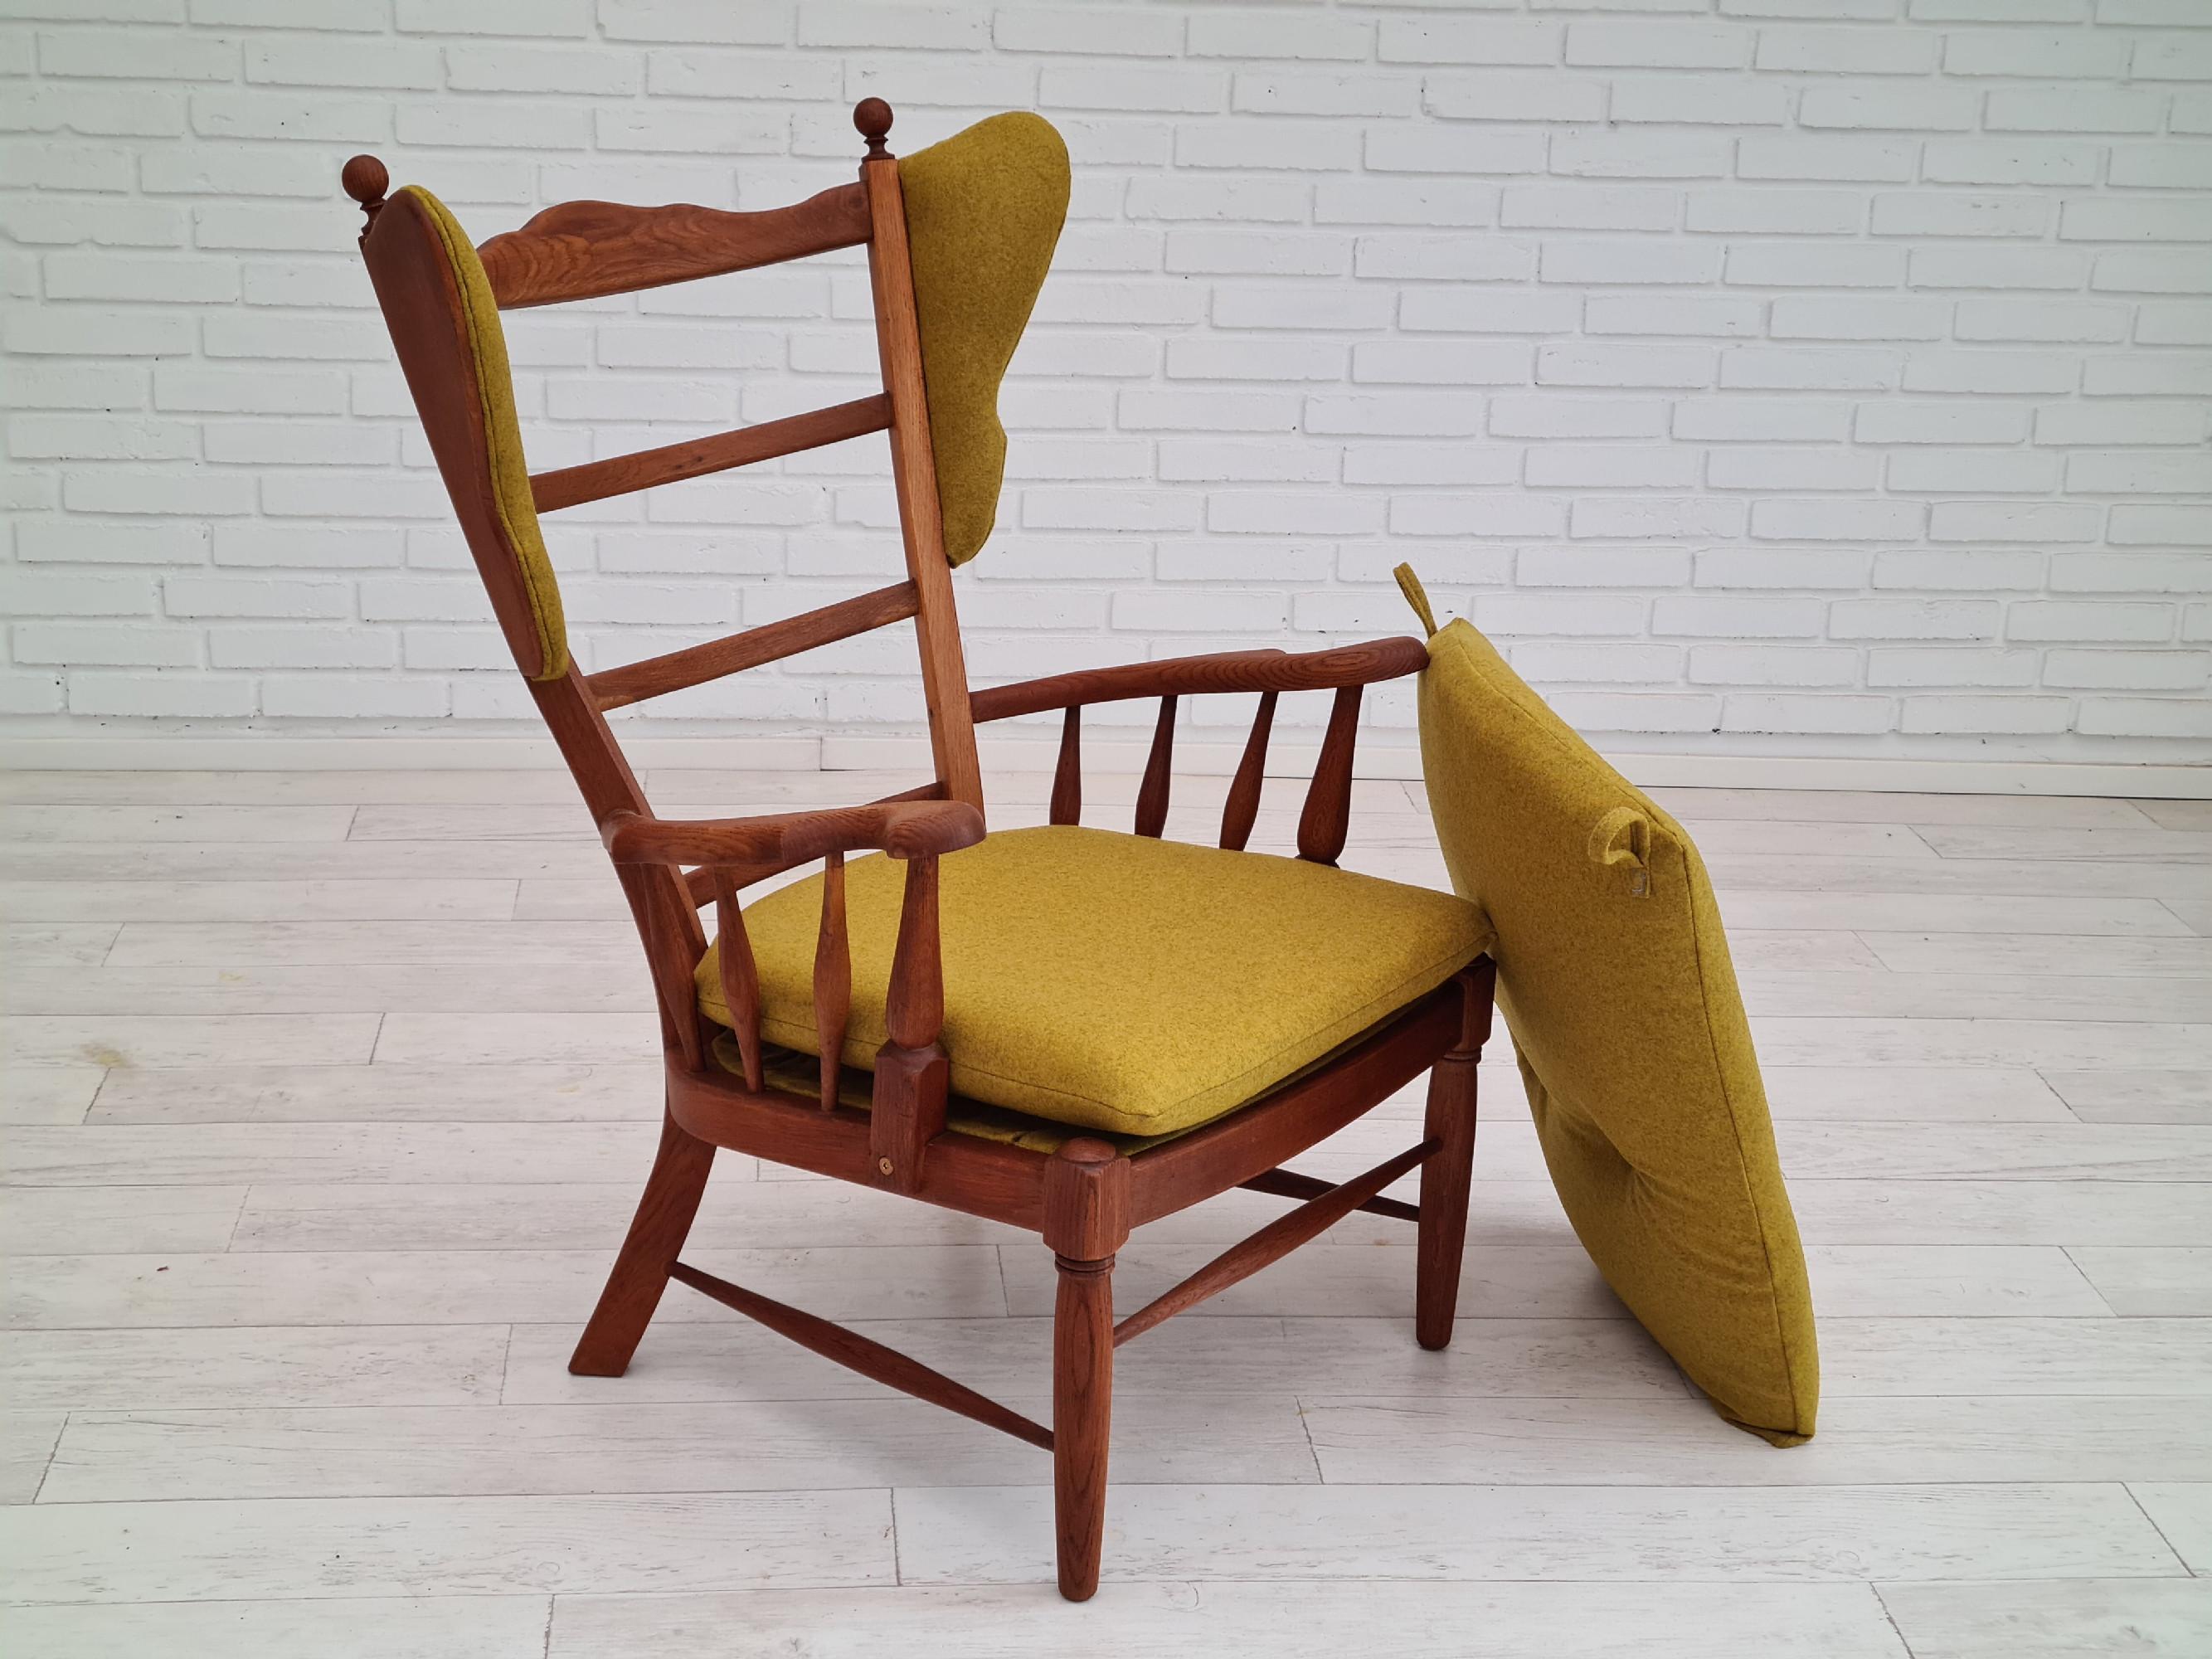 60s, reupholstered Danish high-backed ear flap chair, solid oak, furniture wool 3